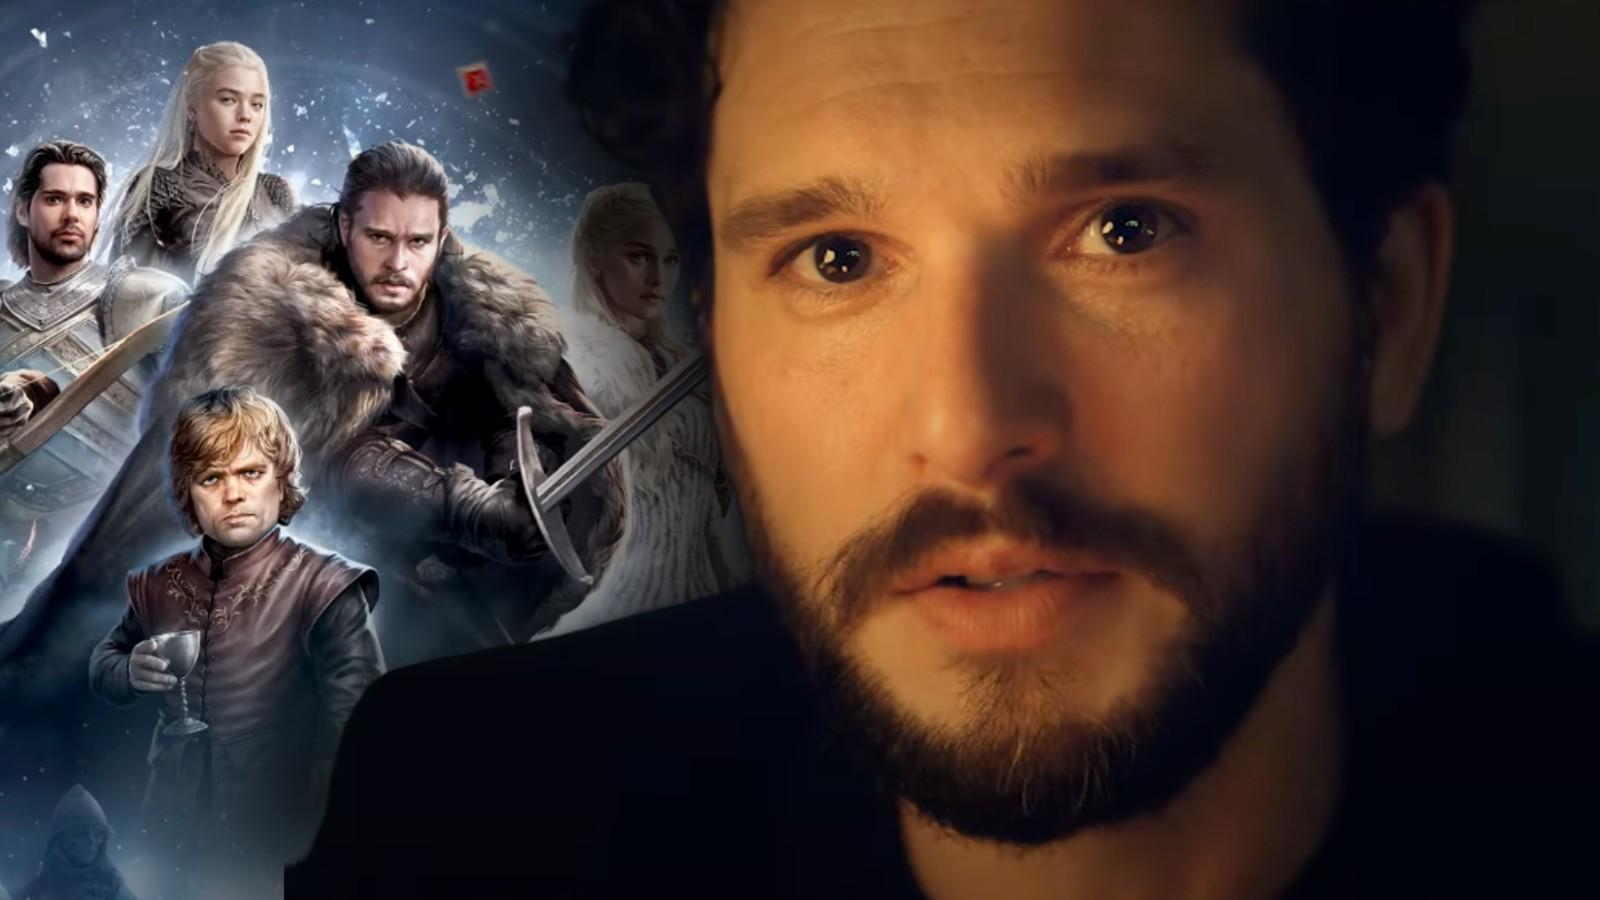 Kit Harington in the Game of Thrones: Legends advert